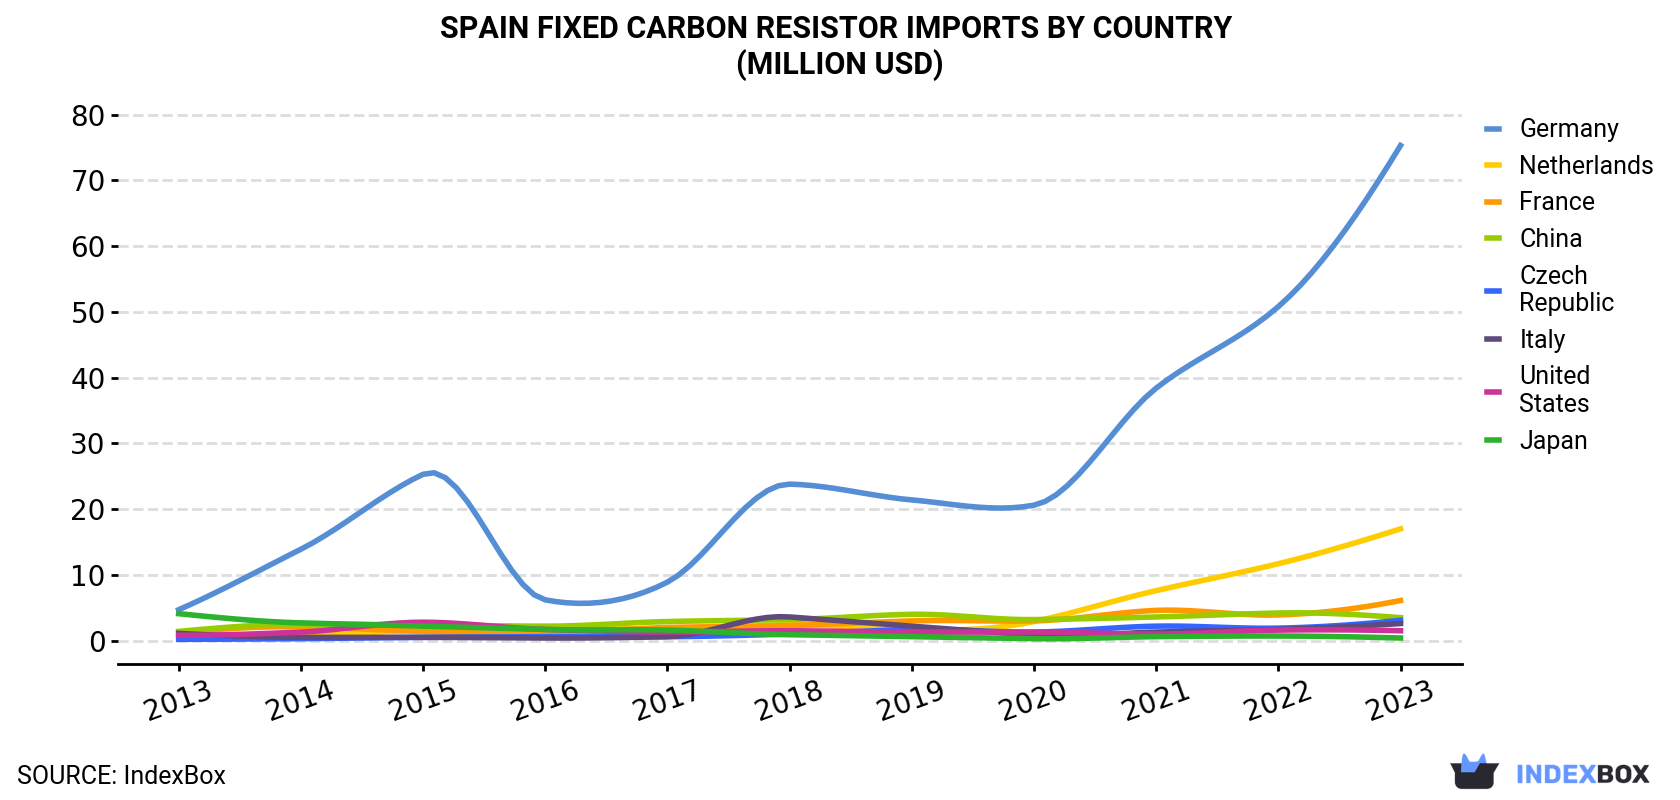 Spain Fixed Carbon Resistor Imports By Country (Million USD)